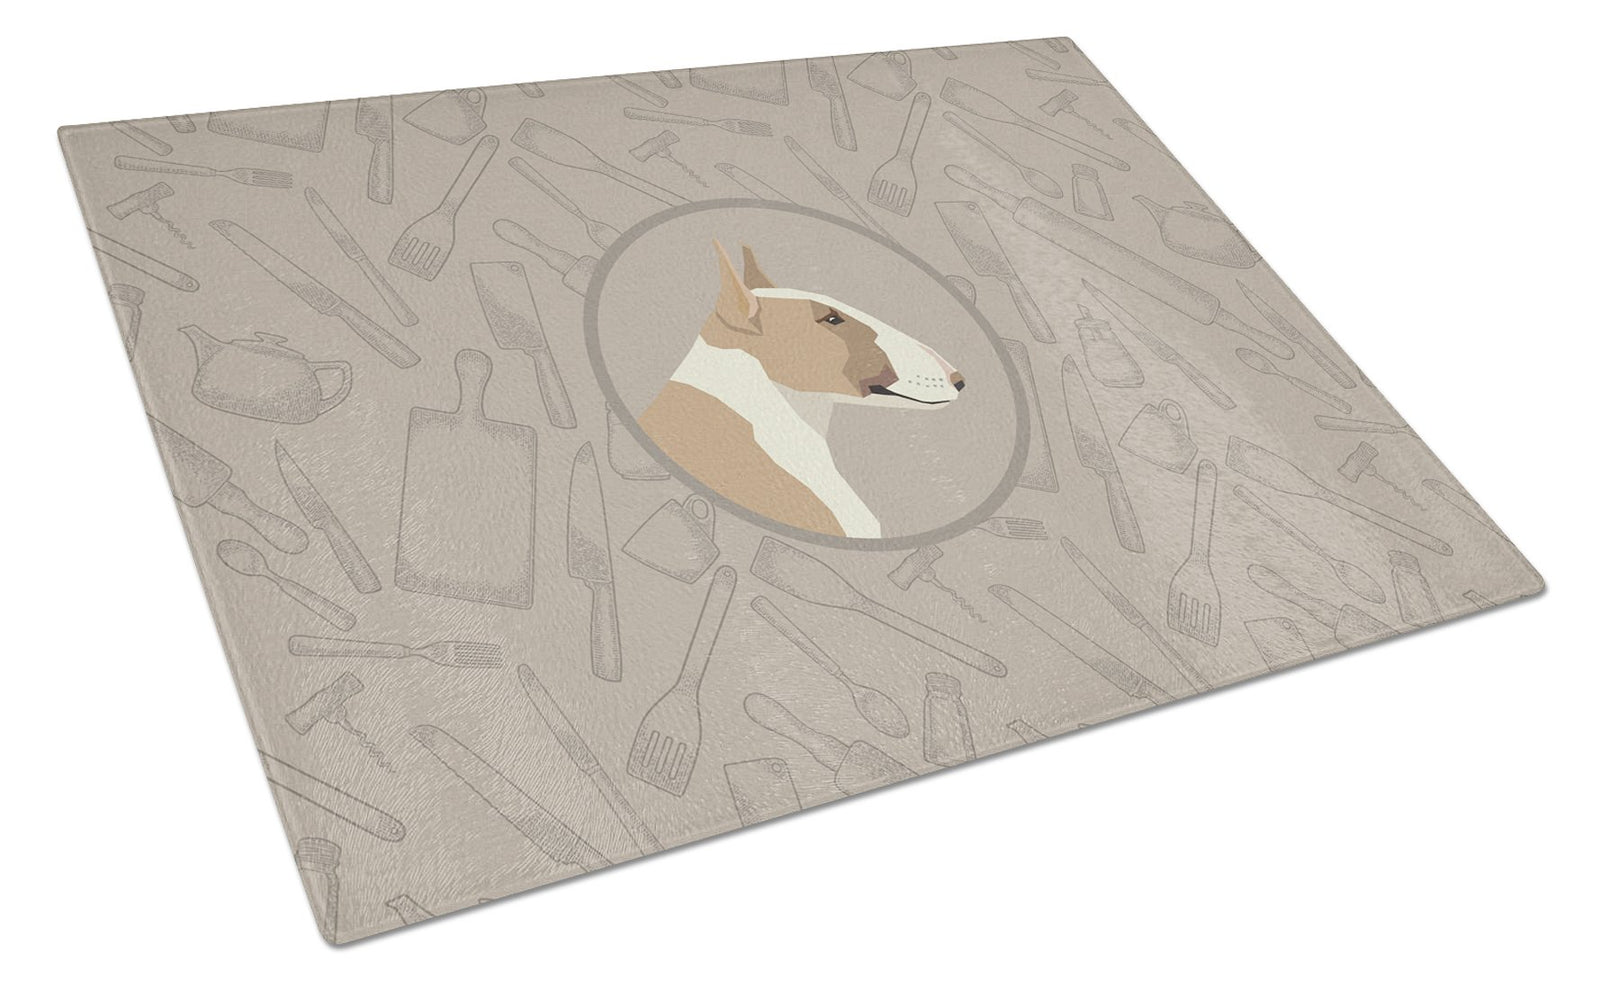 Fawn and White Bull Terrier In the Kitchen Glass Cutting Board Large CK2175LCB by Caroline's Treasures